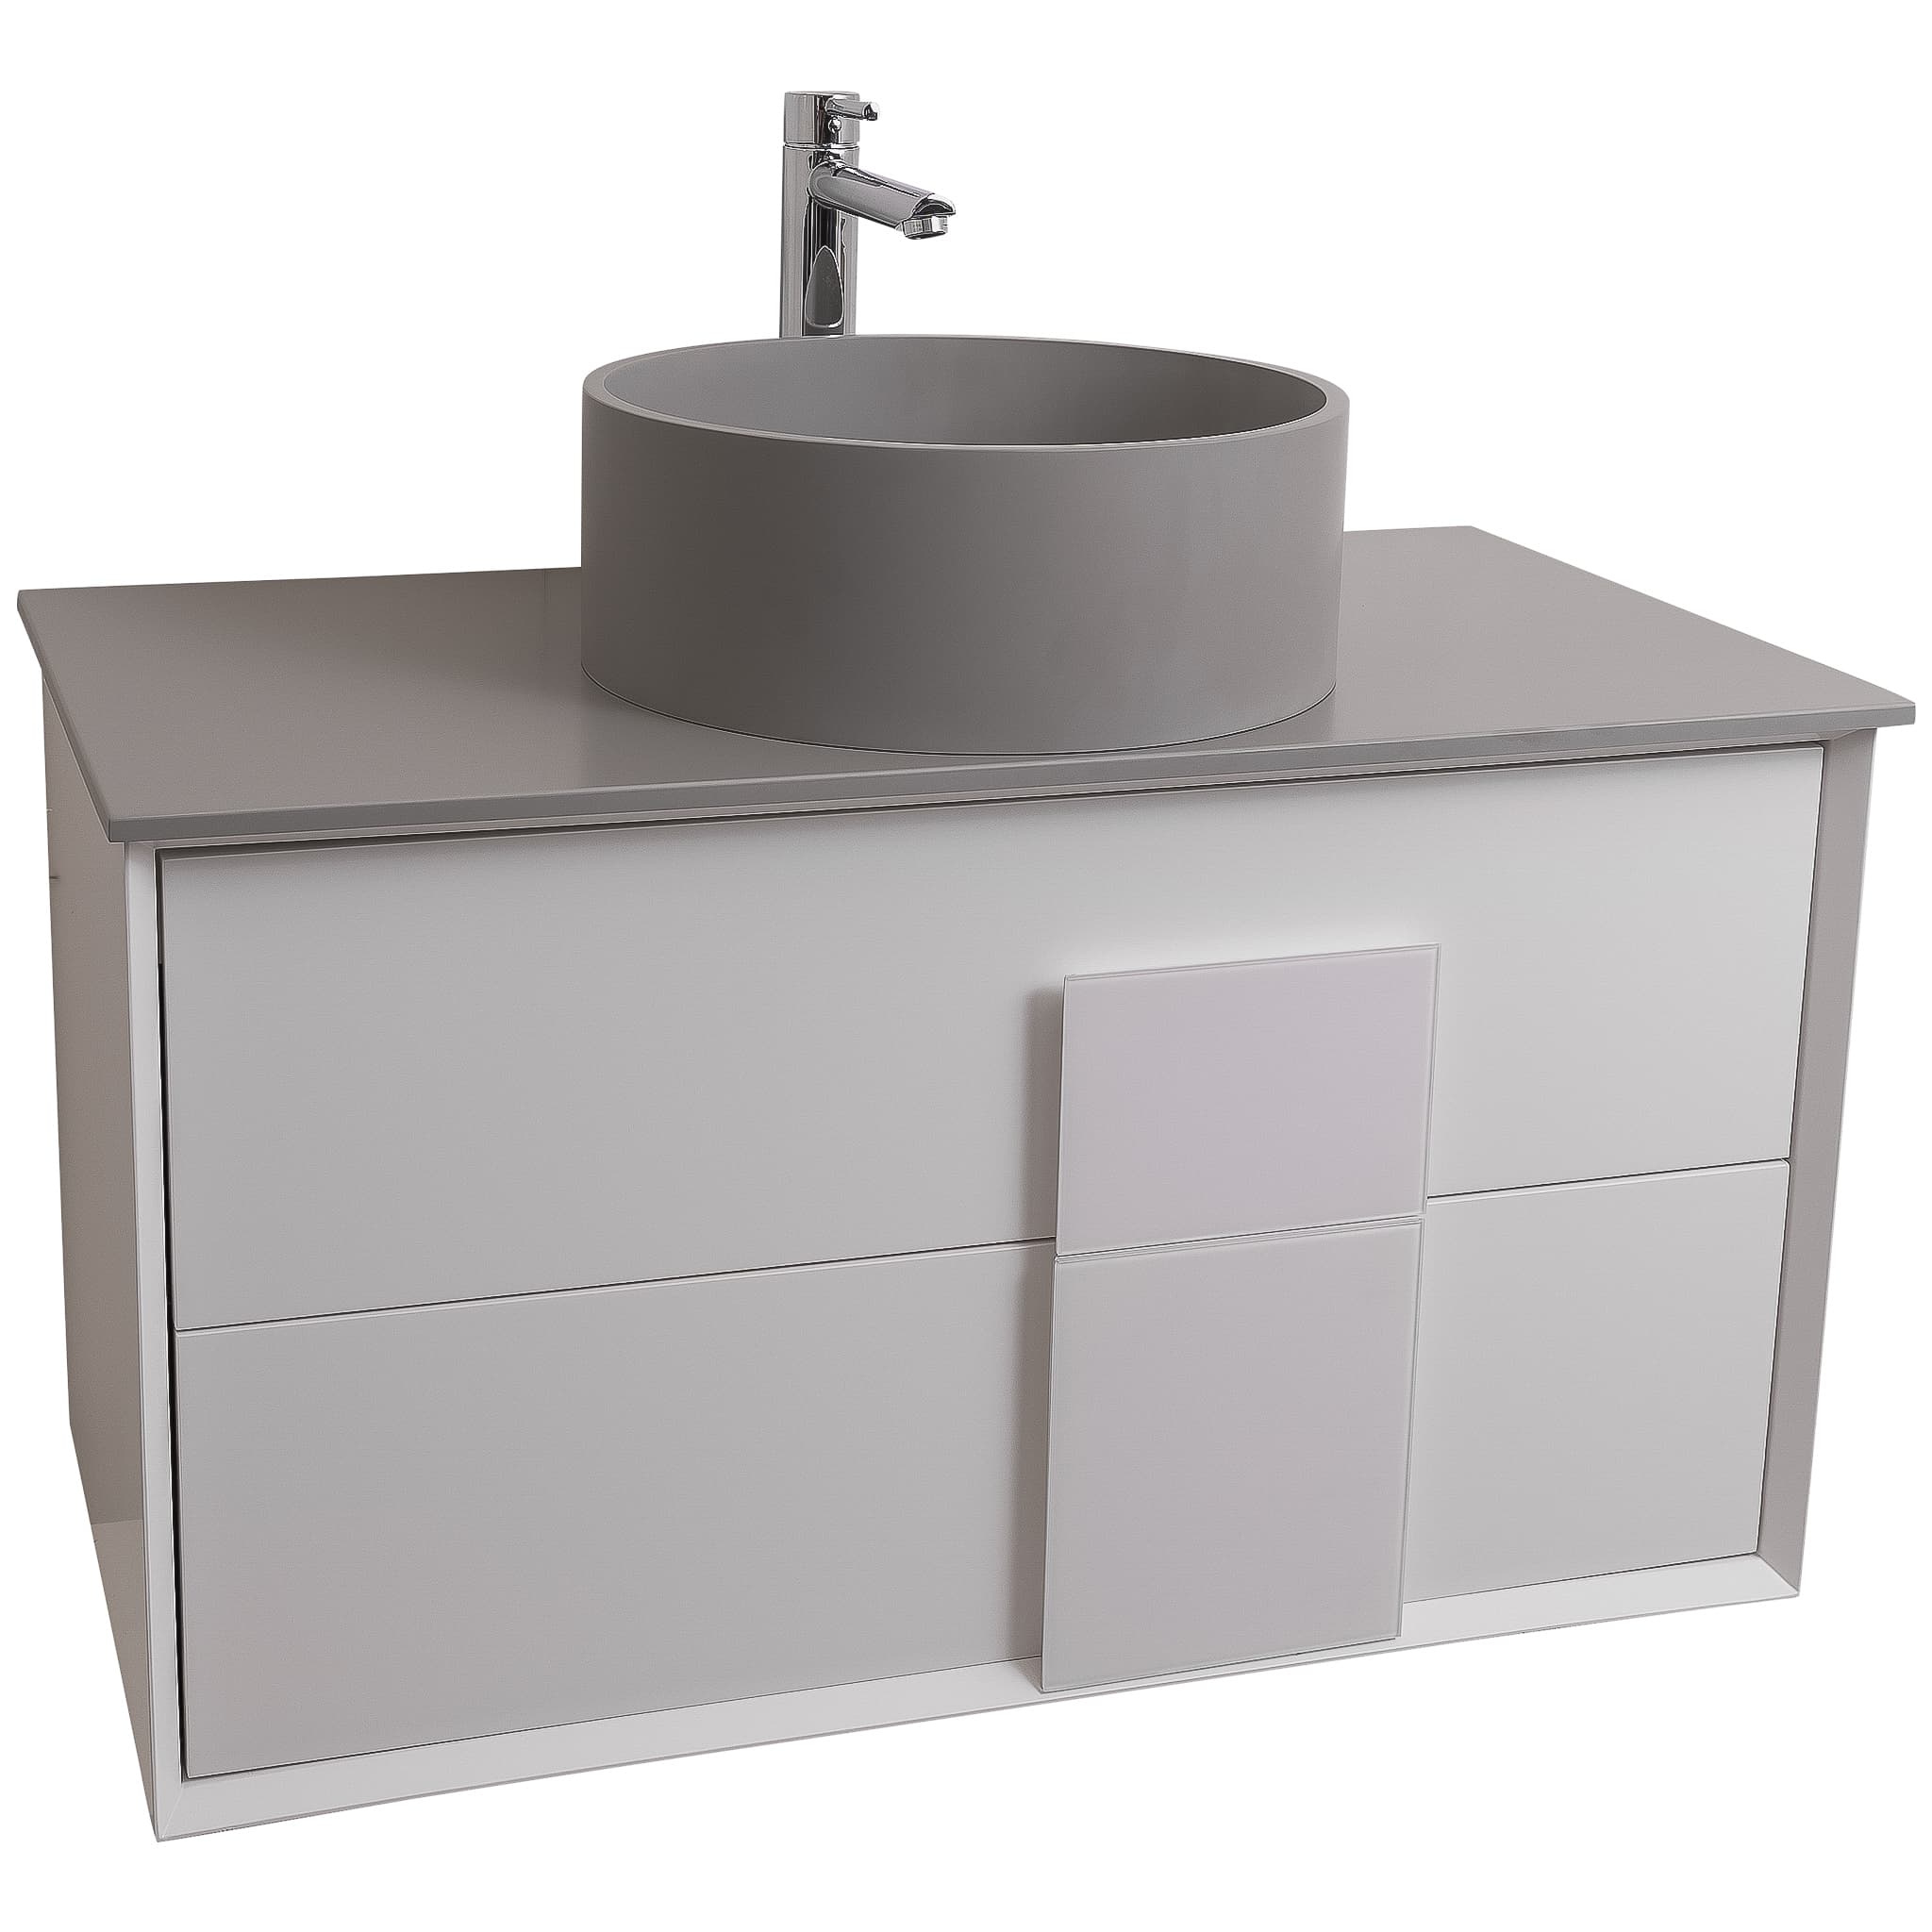 Piazza 31.5 Matte White With White Handle Cabinet, Solid Surface Flat Grey Counter and Round Solid Surface Grey Basin 1386, Wall Mounted Modern Vanity Set